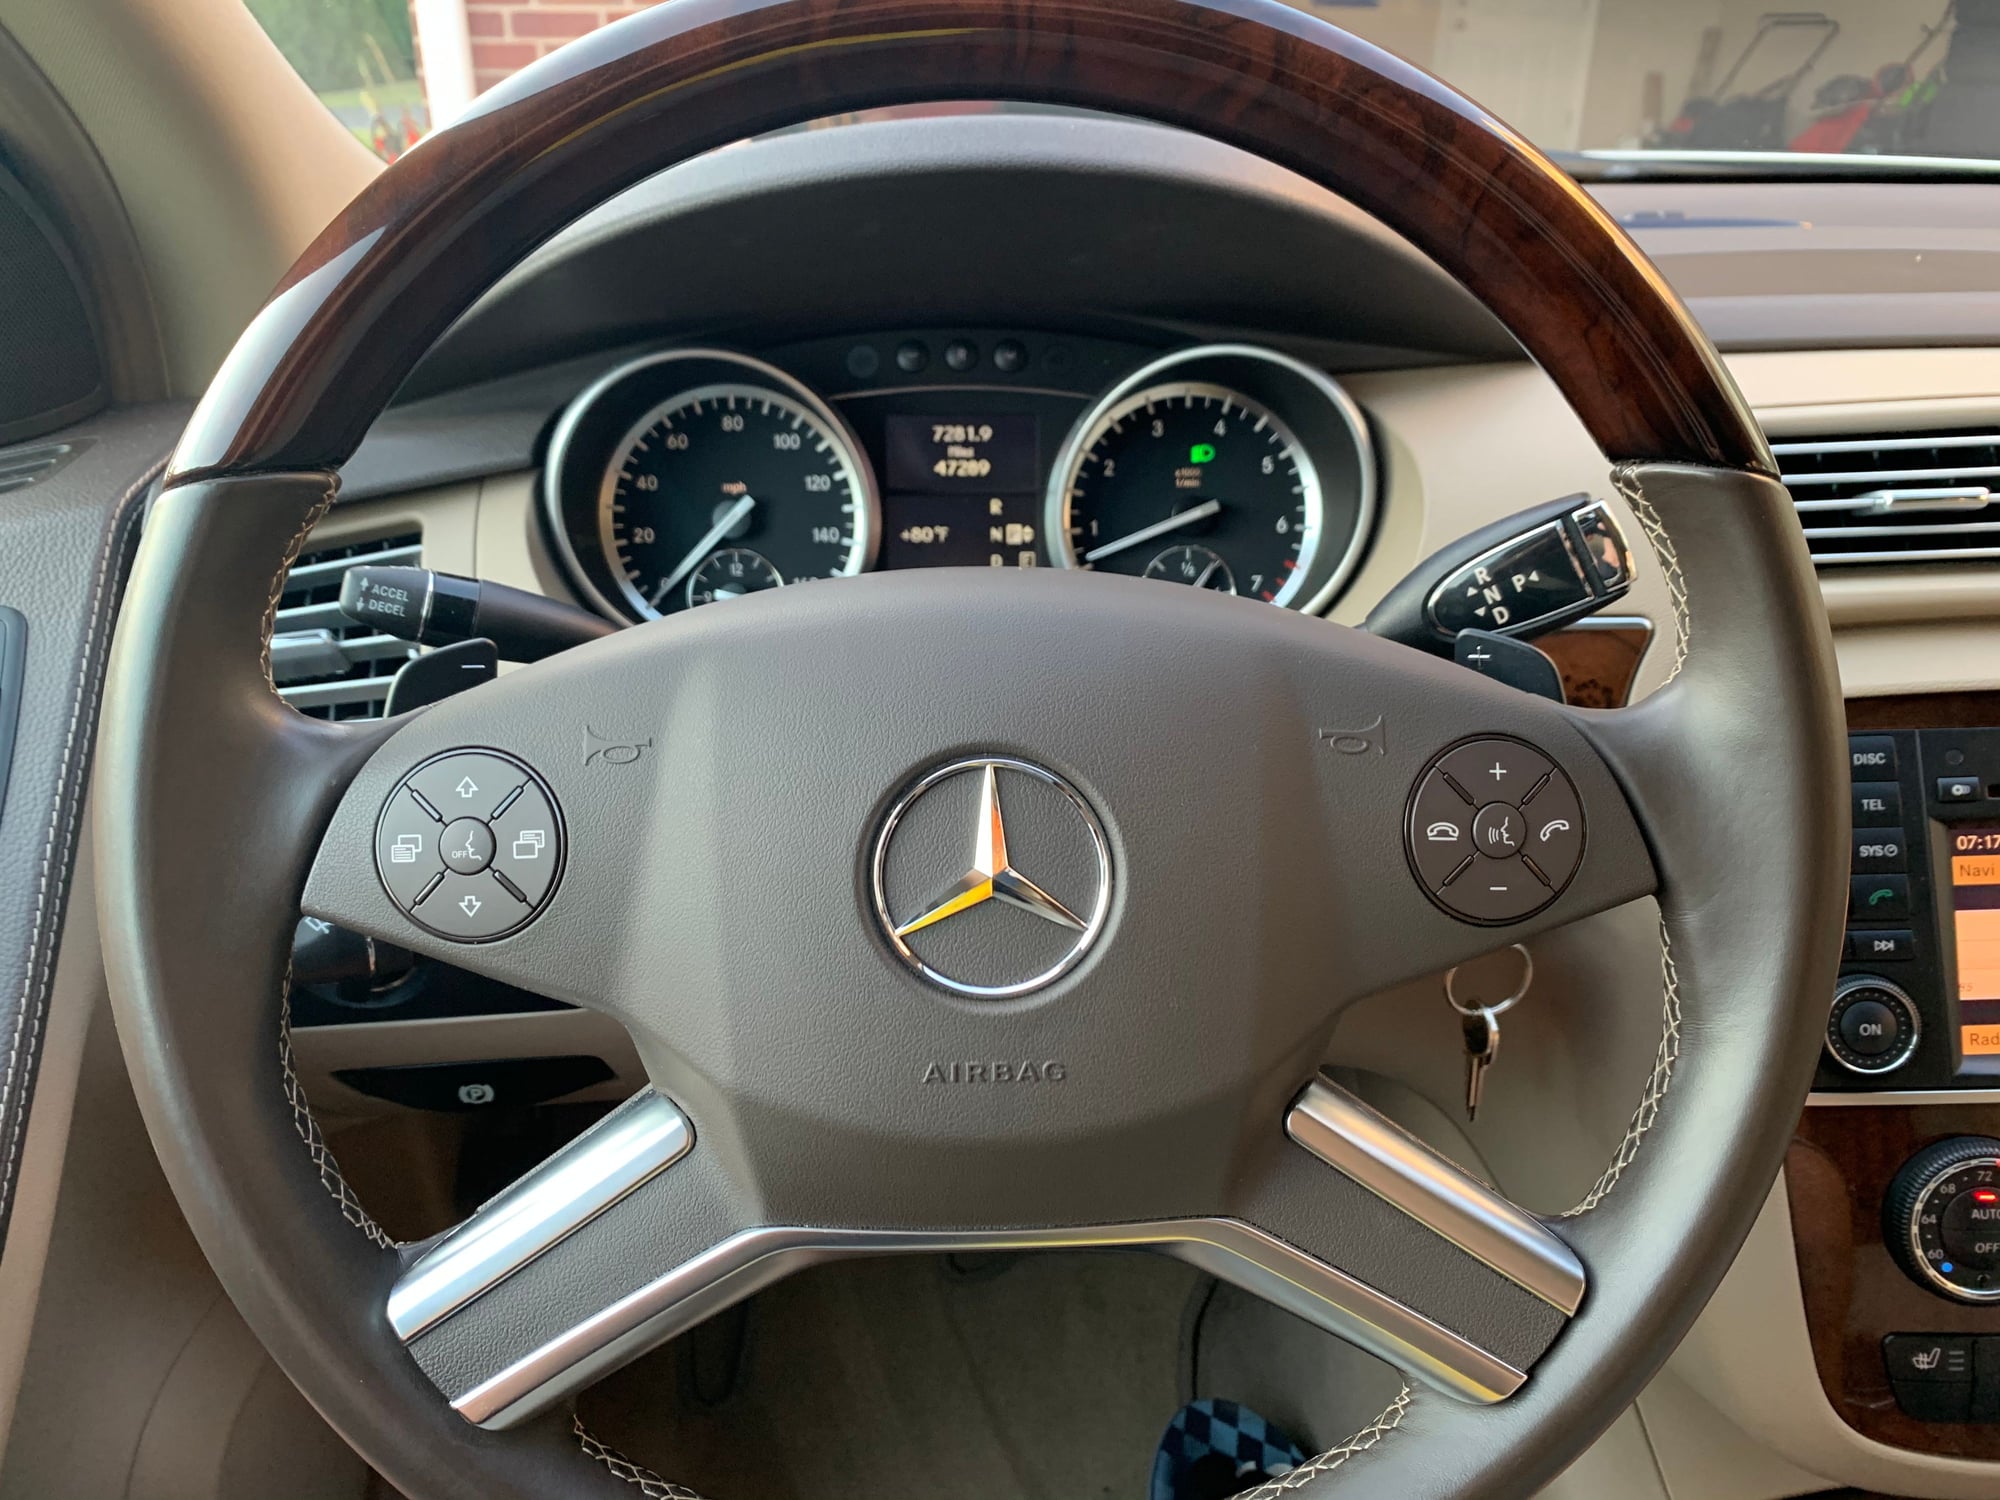 2011 Mercedes-Benz R350 - 2011 Mercedes R350 - Used - VIN 4jgcb6fe4ba115917 - 47,600 Miles - 6 cyl - AWD - Automatic - Van - White - Libertyville, IL 60048, United States